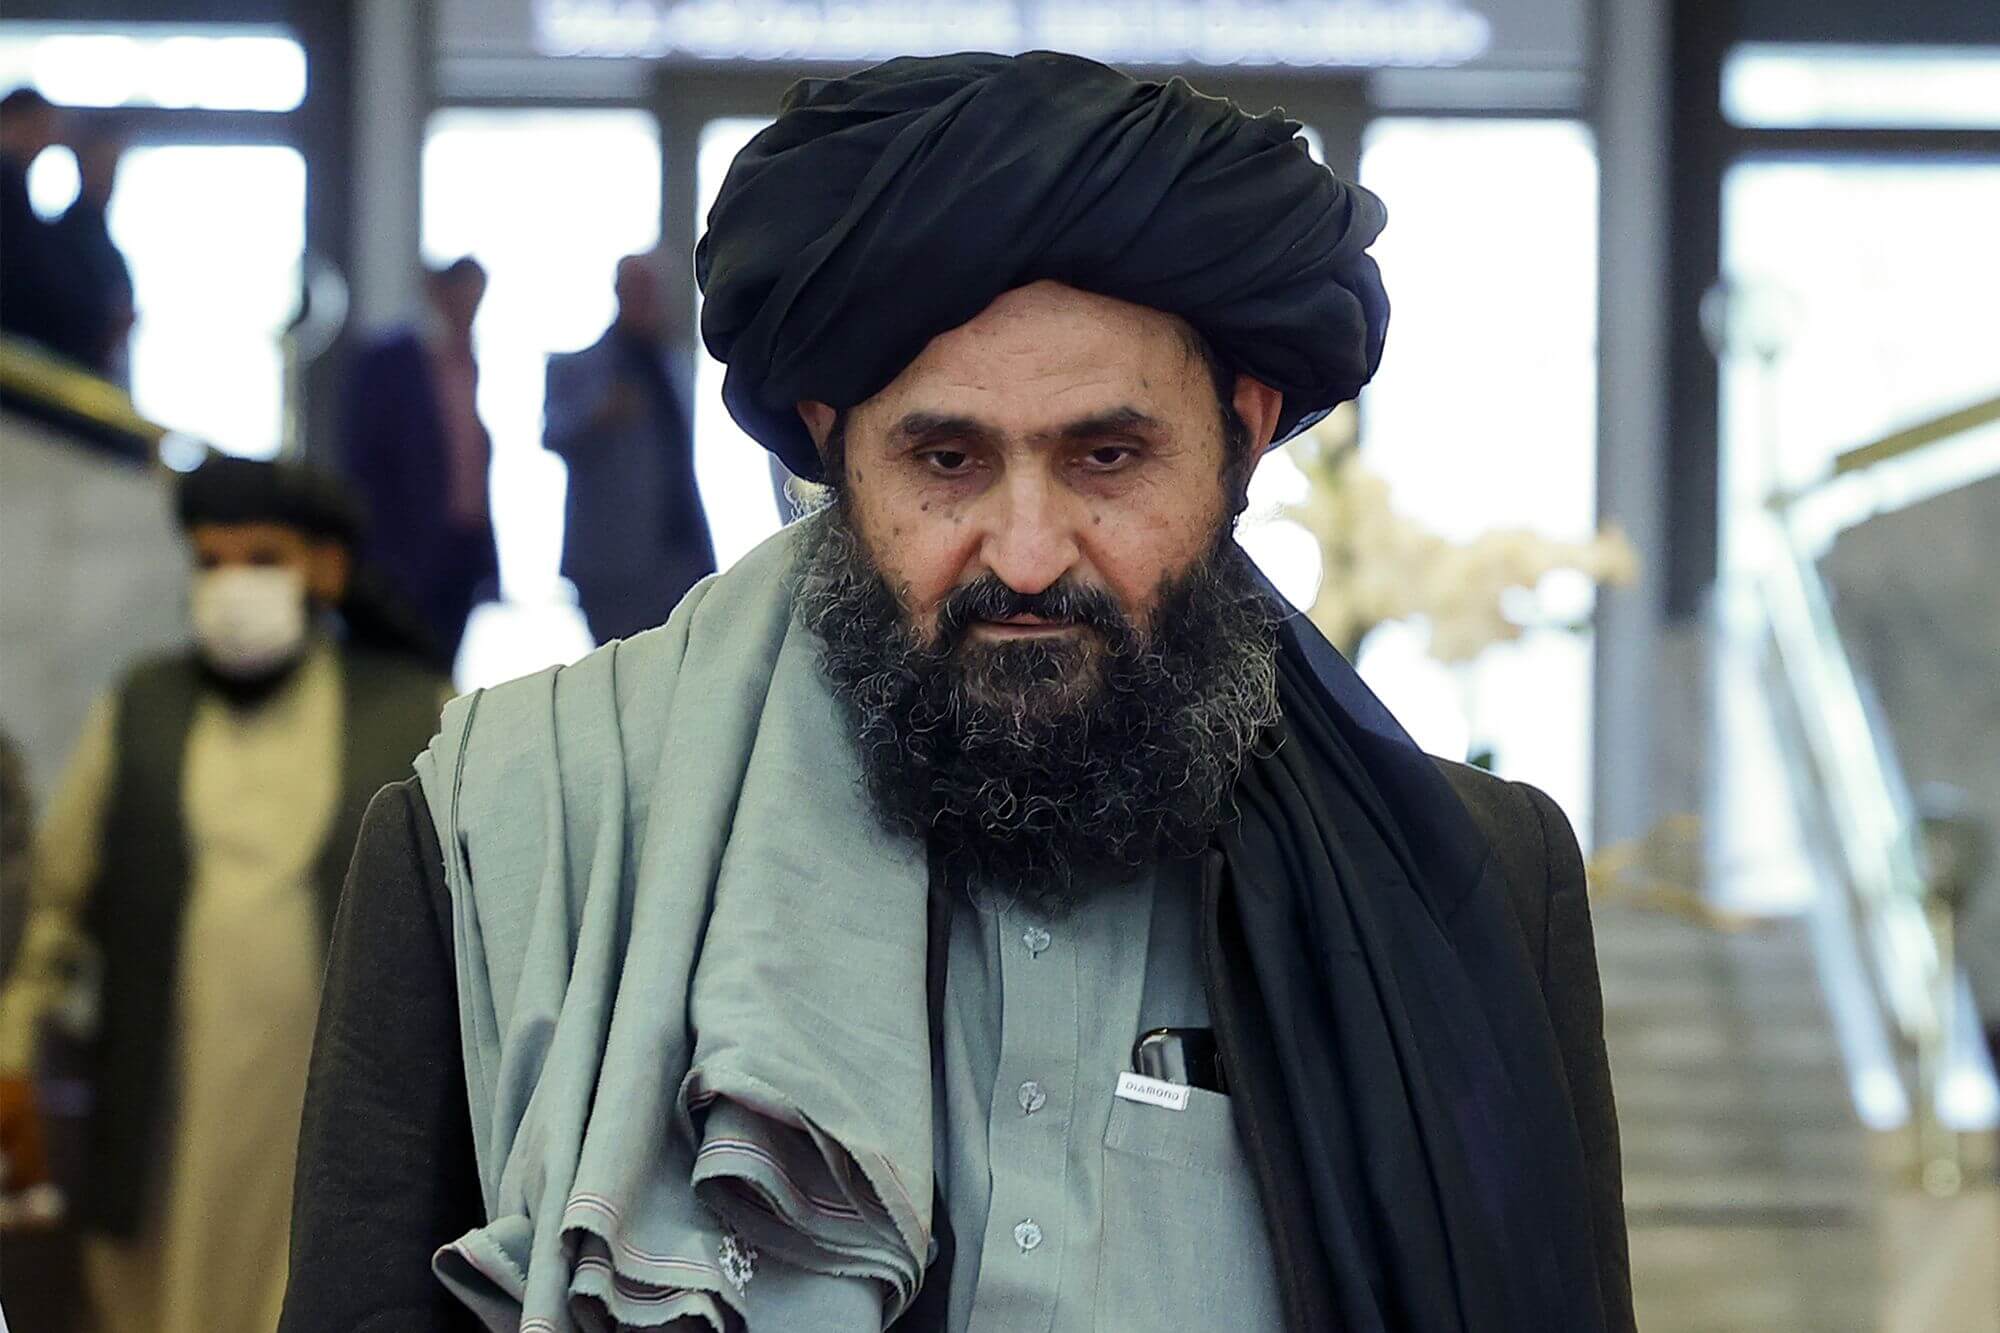 Taliban co-founder Mullah Baradar to lead new Afghanistan government